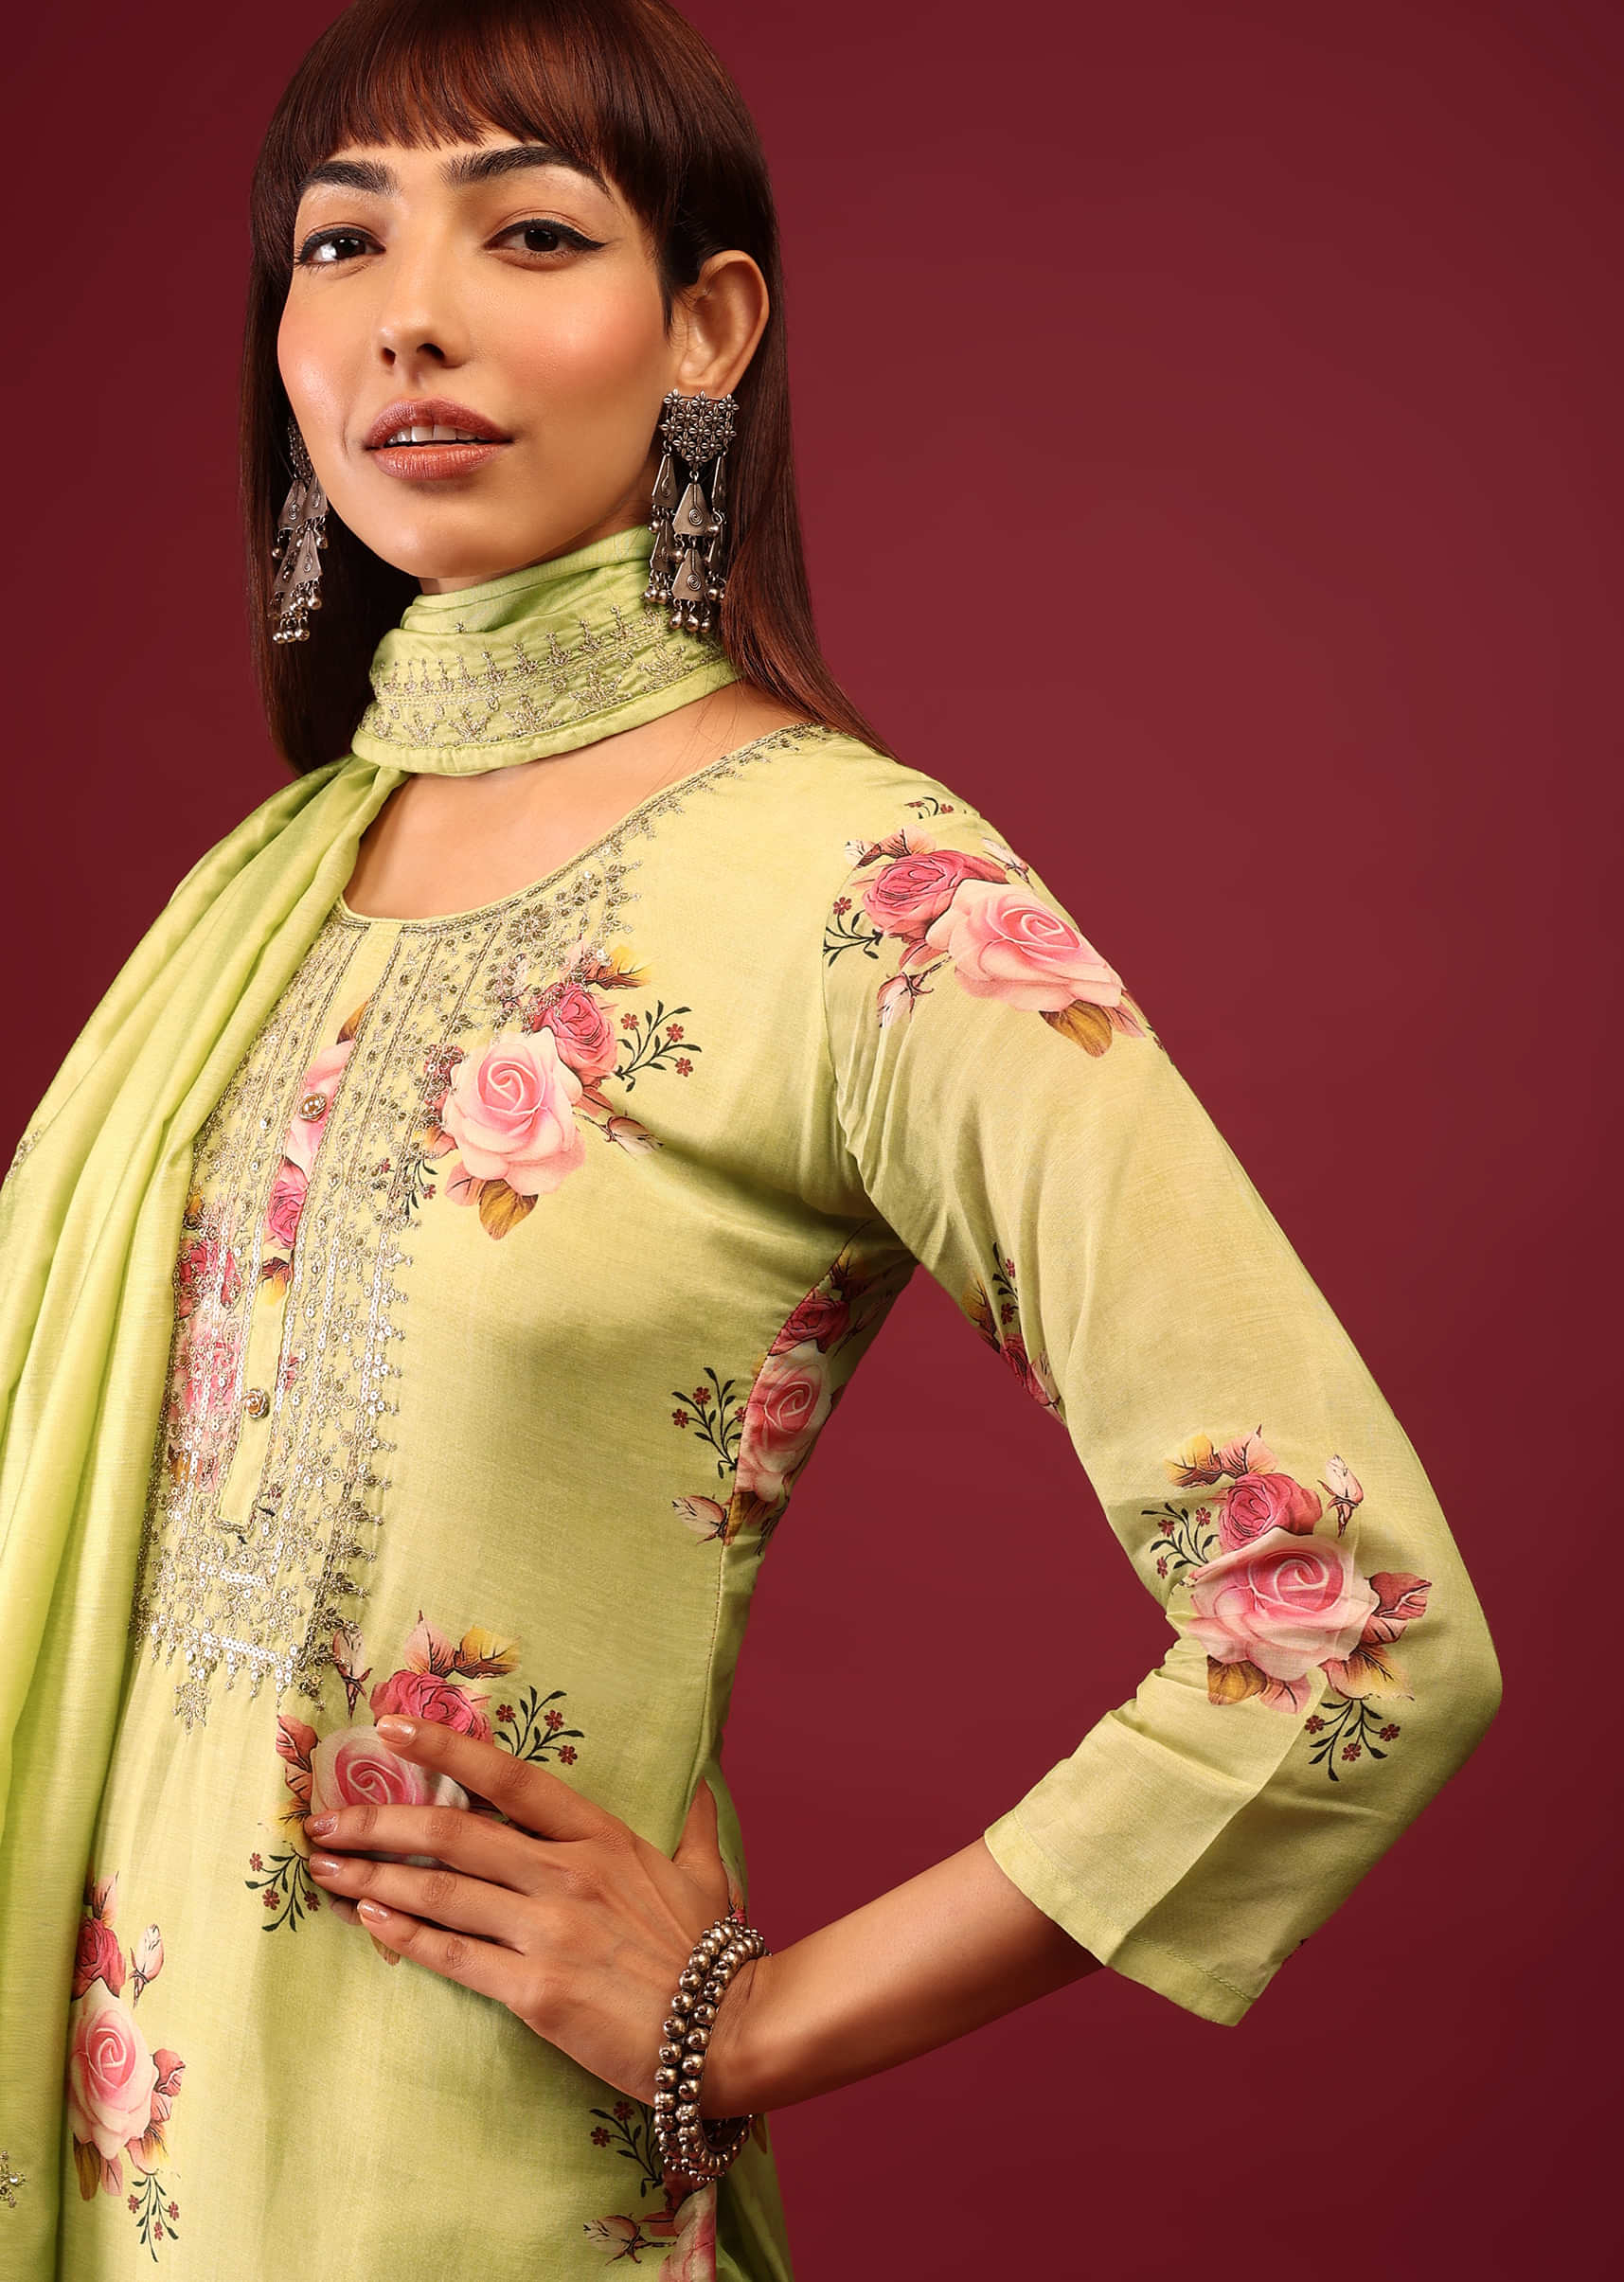 Lime Green Floral Print Pant Suit In Straight Cut And U Neckline With Zari Embroidery